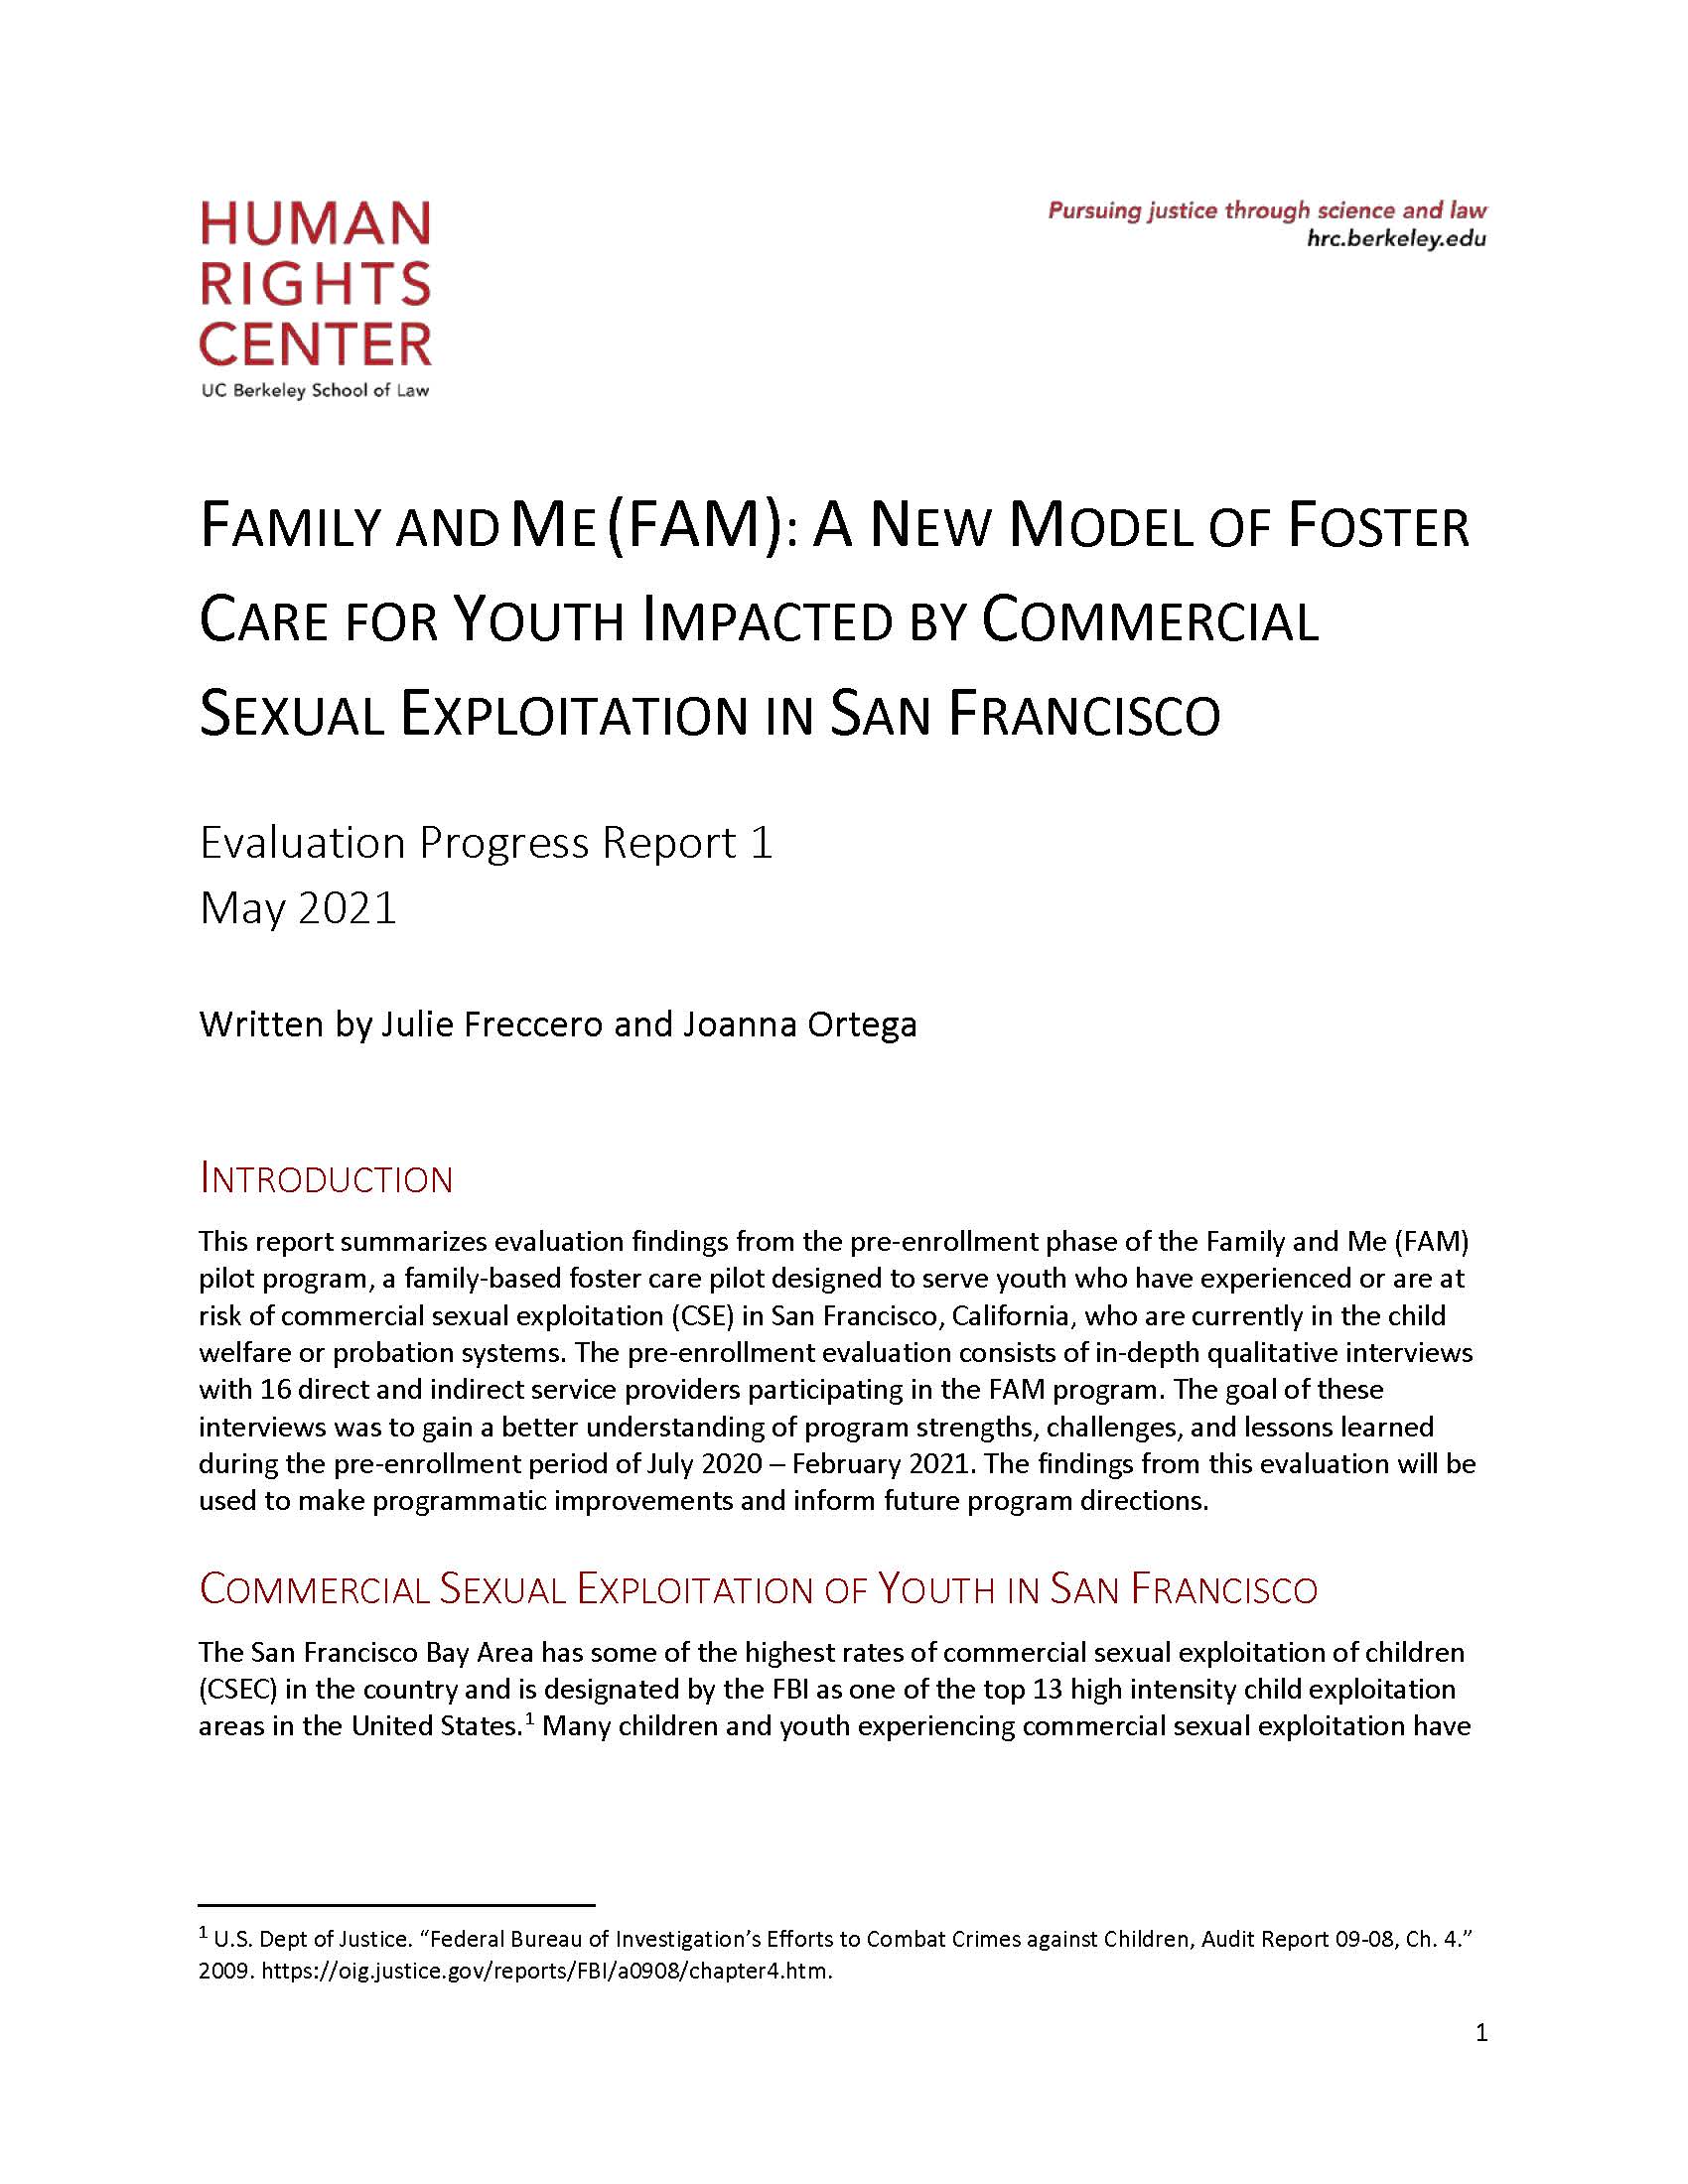 Pages from Family and Me (FAM)- A New Model of Foster Care for Youth Impacted by Commercial Sexual Exploitation in San Francisco (Evaluation 1)